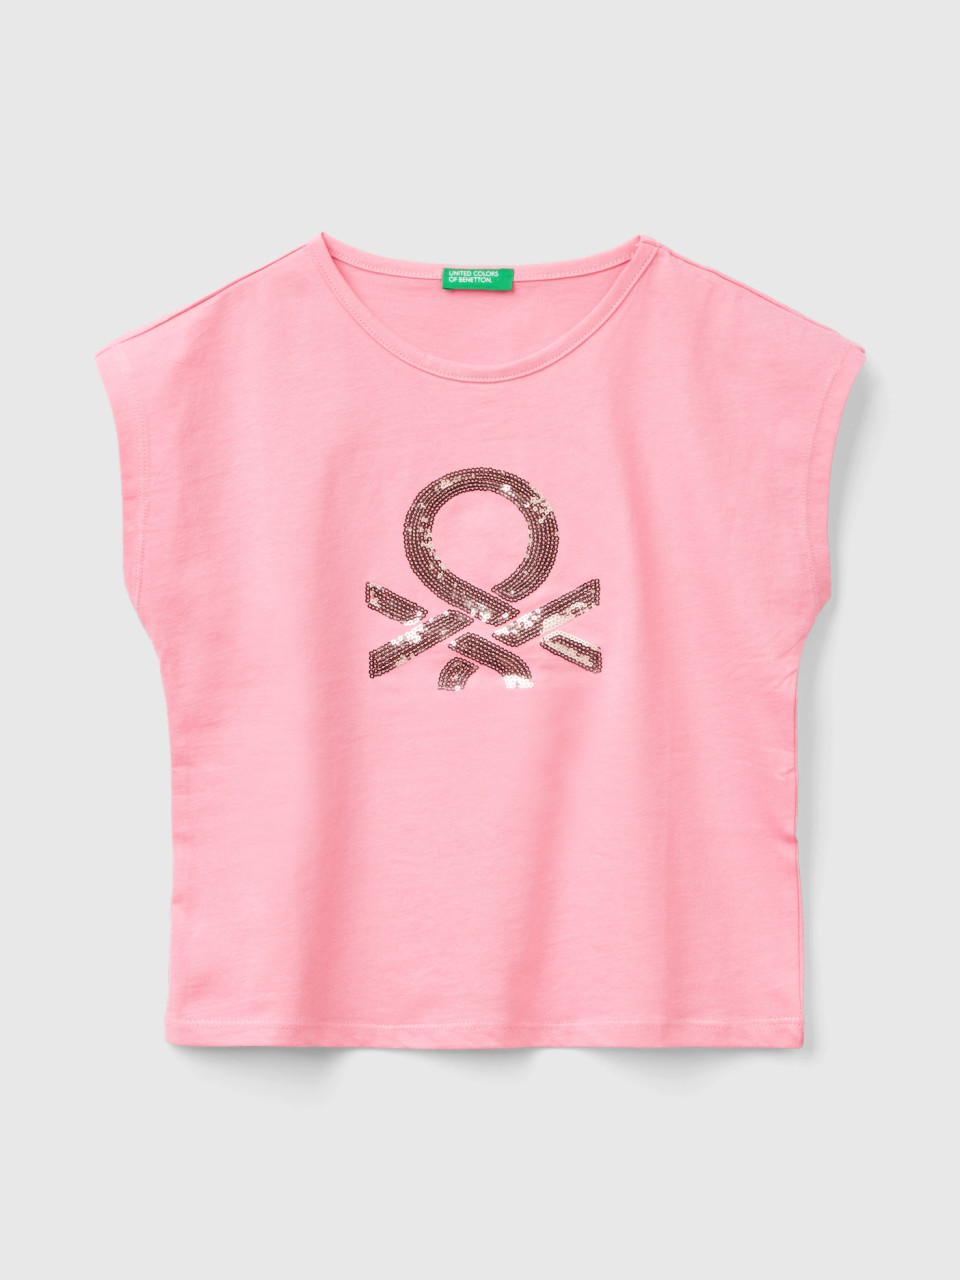 Benetton, T-shirt With Sequins, Pink, Kids